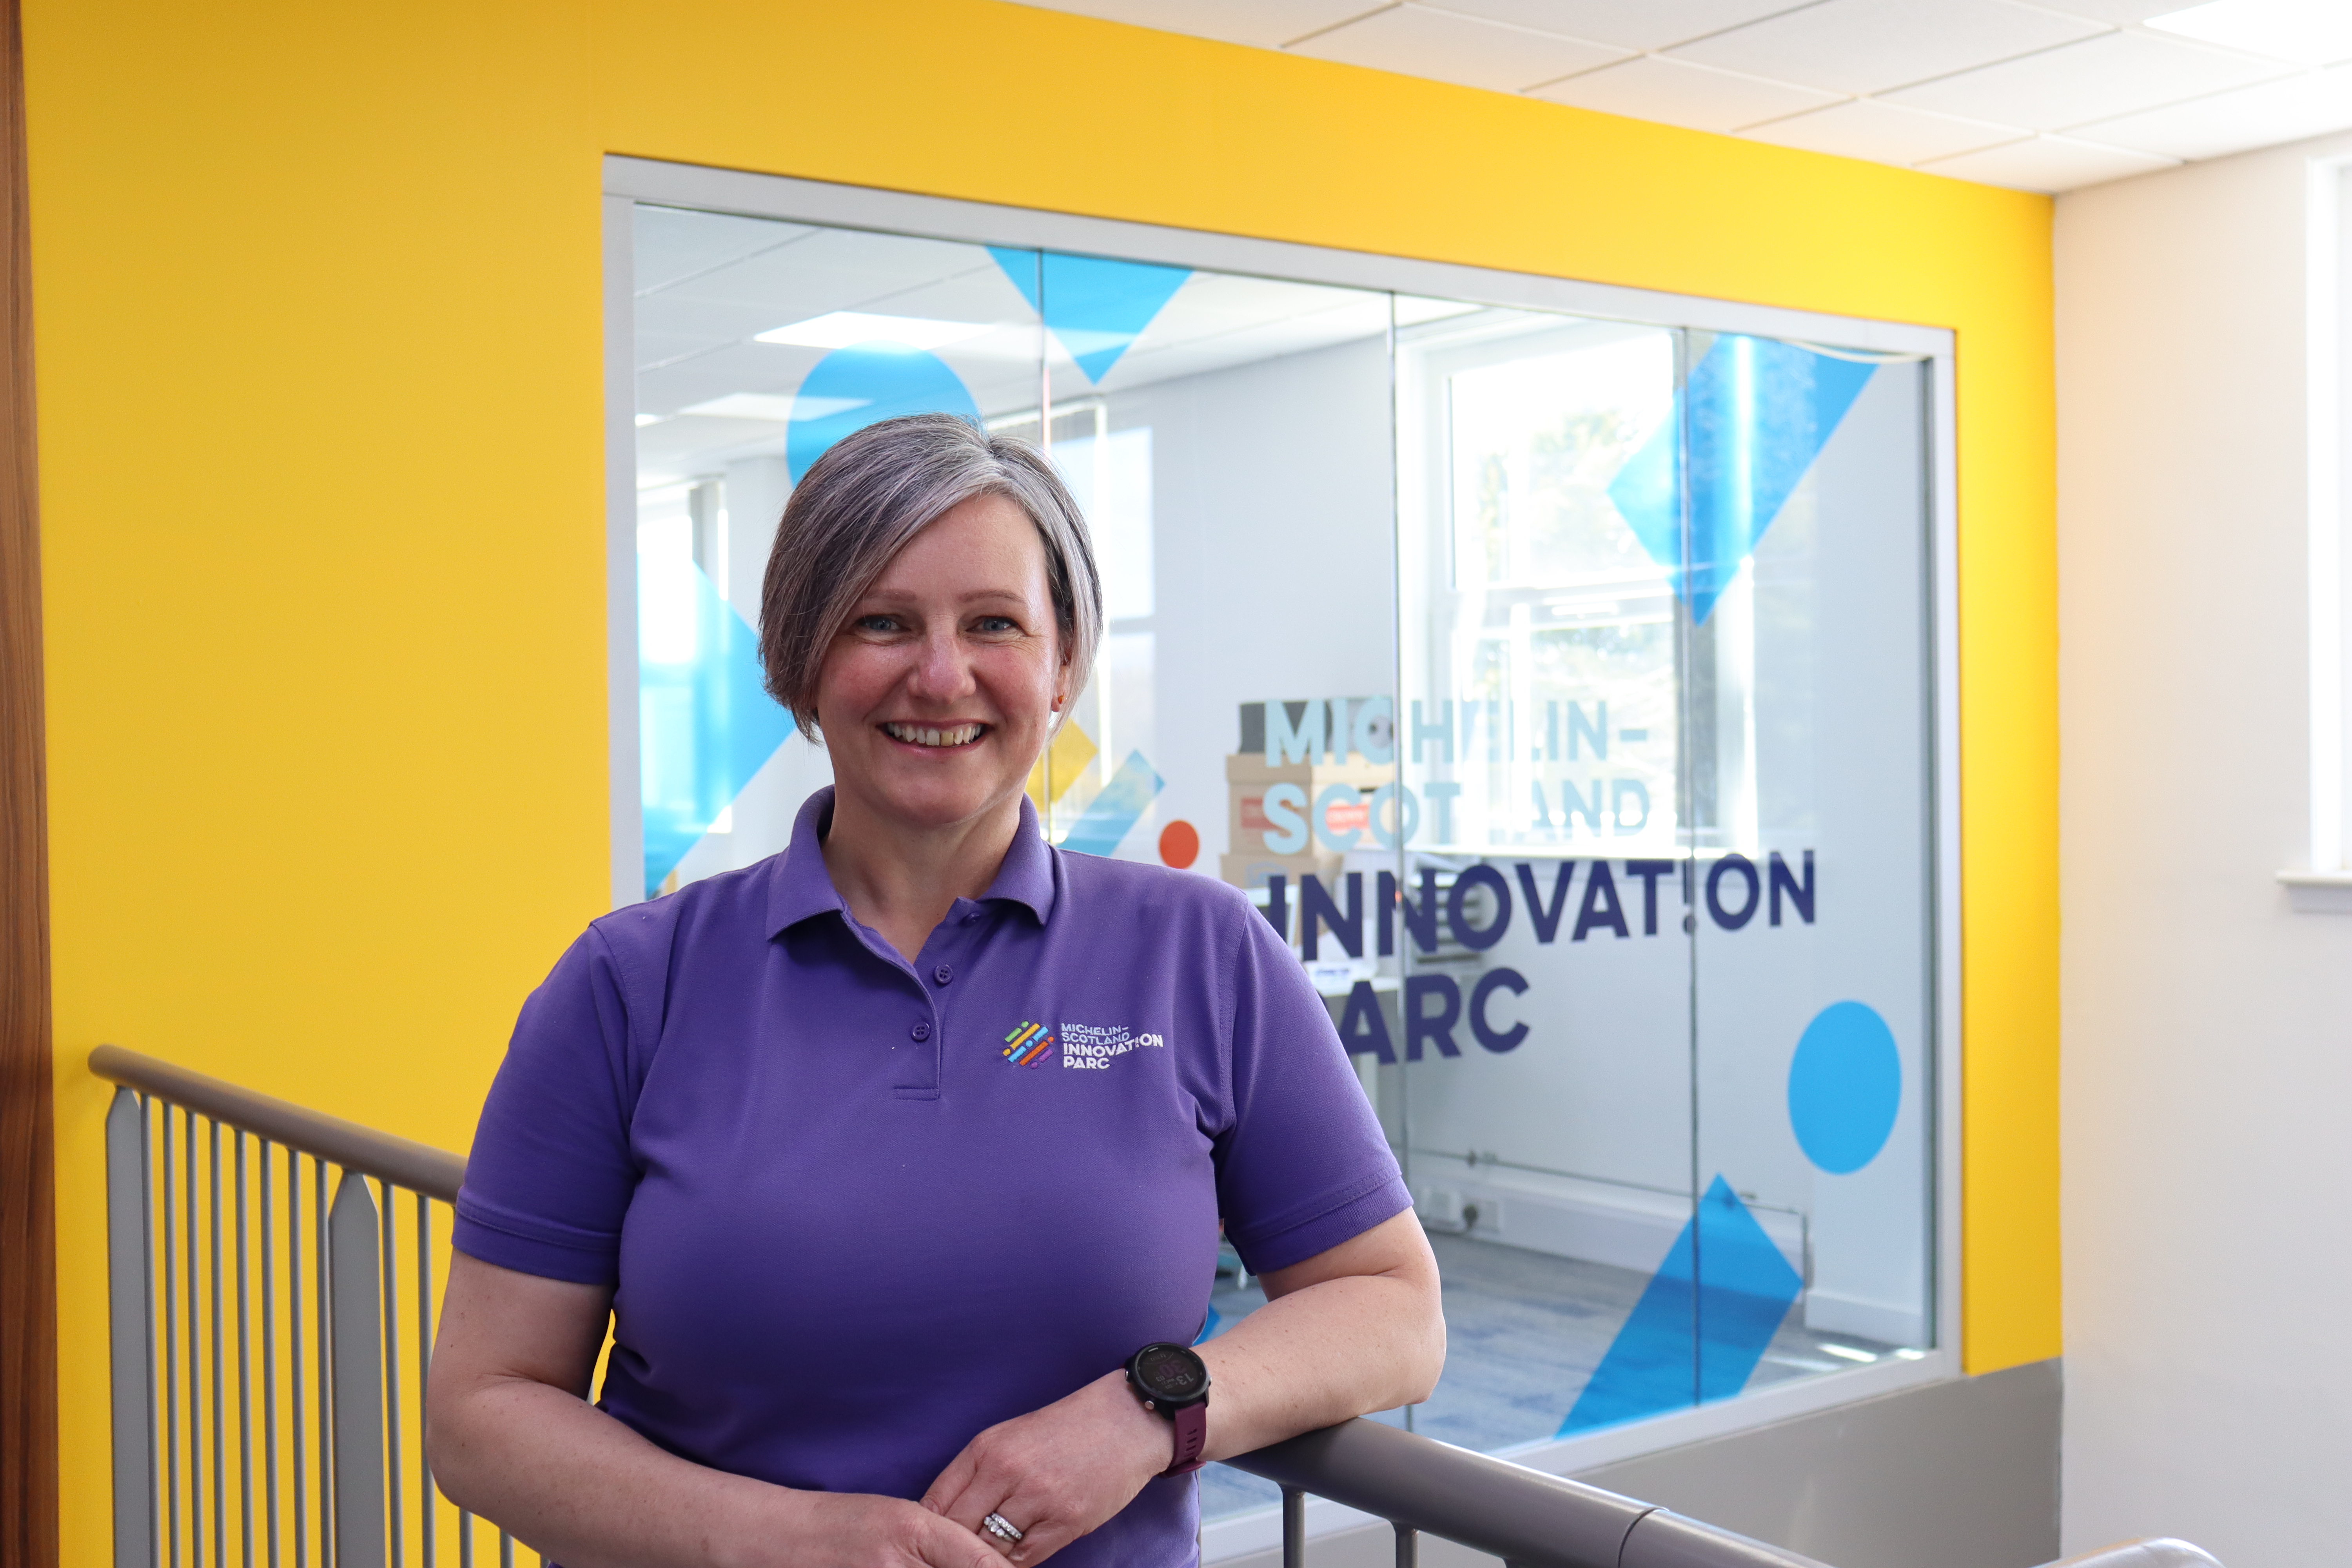 Eight firms awarded funding by Michelin Scotland Innovation Parc